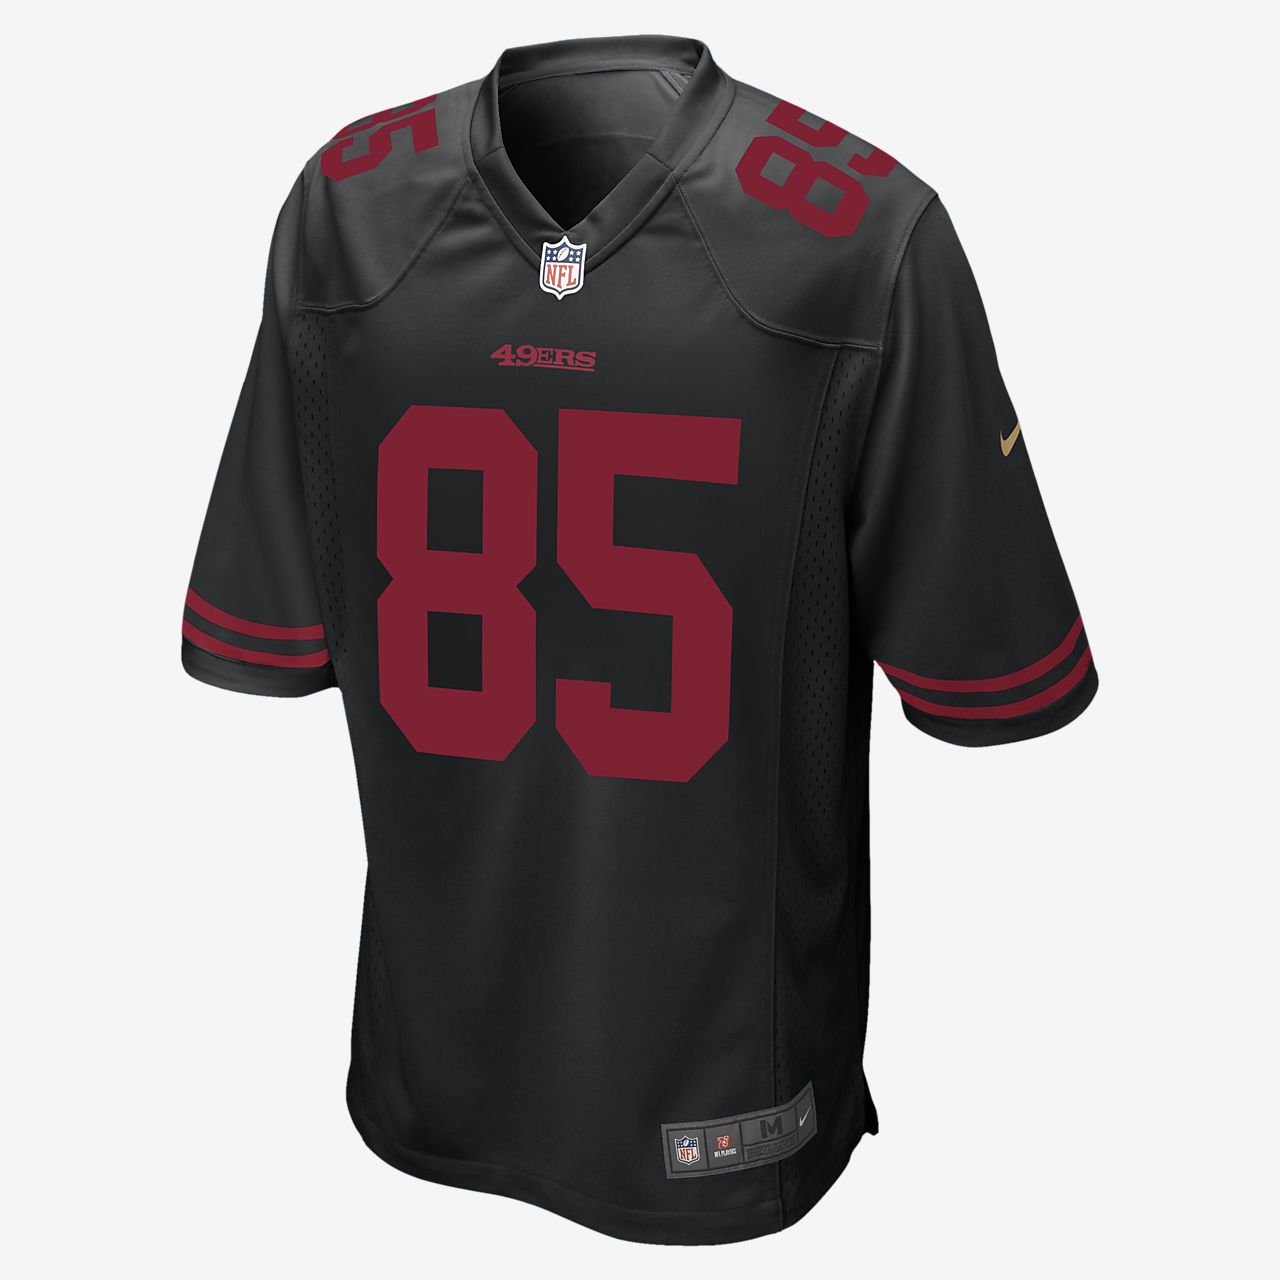 where can i buy a 49ers jersey